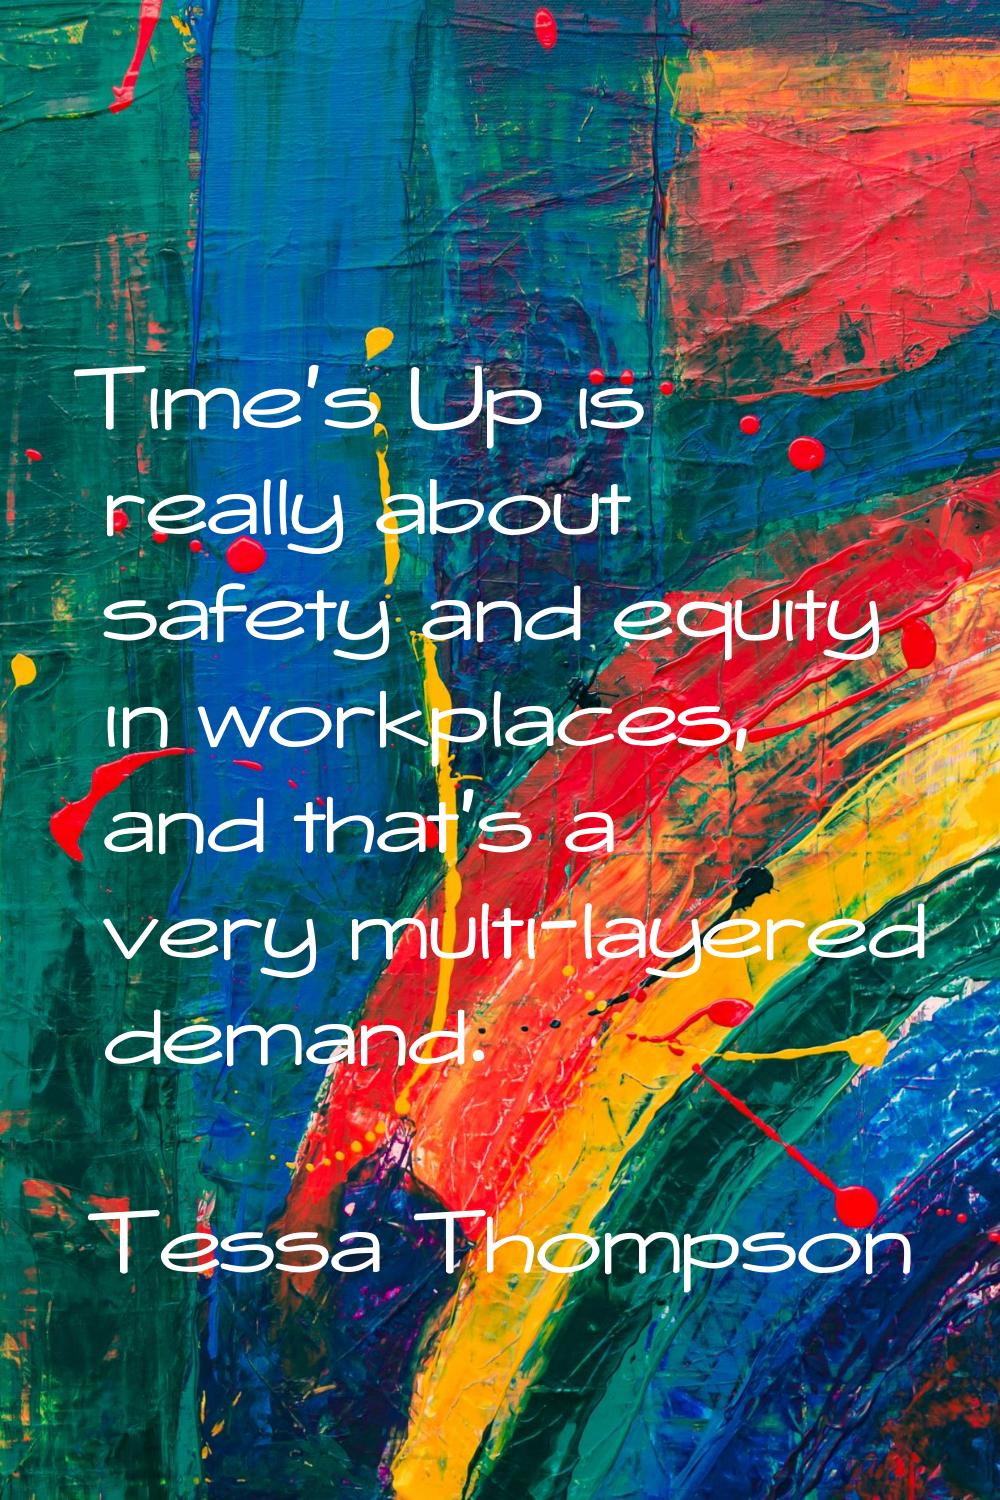 Time's Up is really about safety and equity in workplaces, and that's a very multi-layered demand.